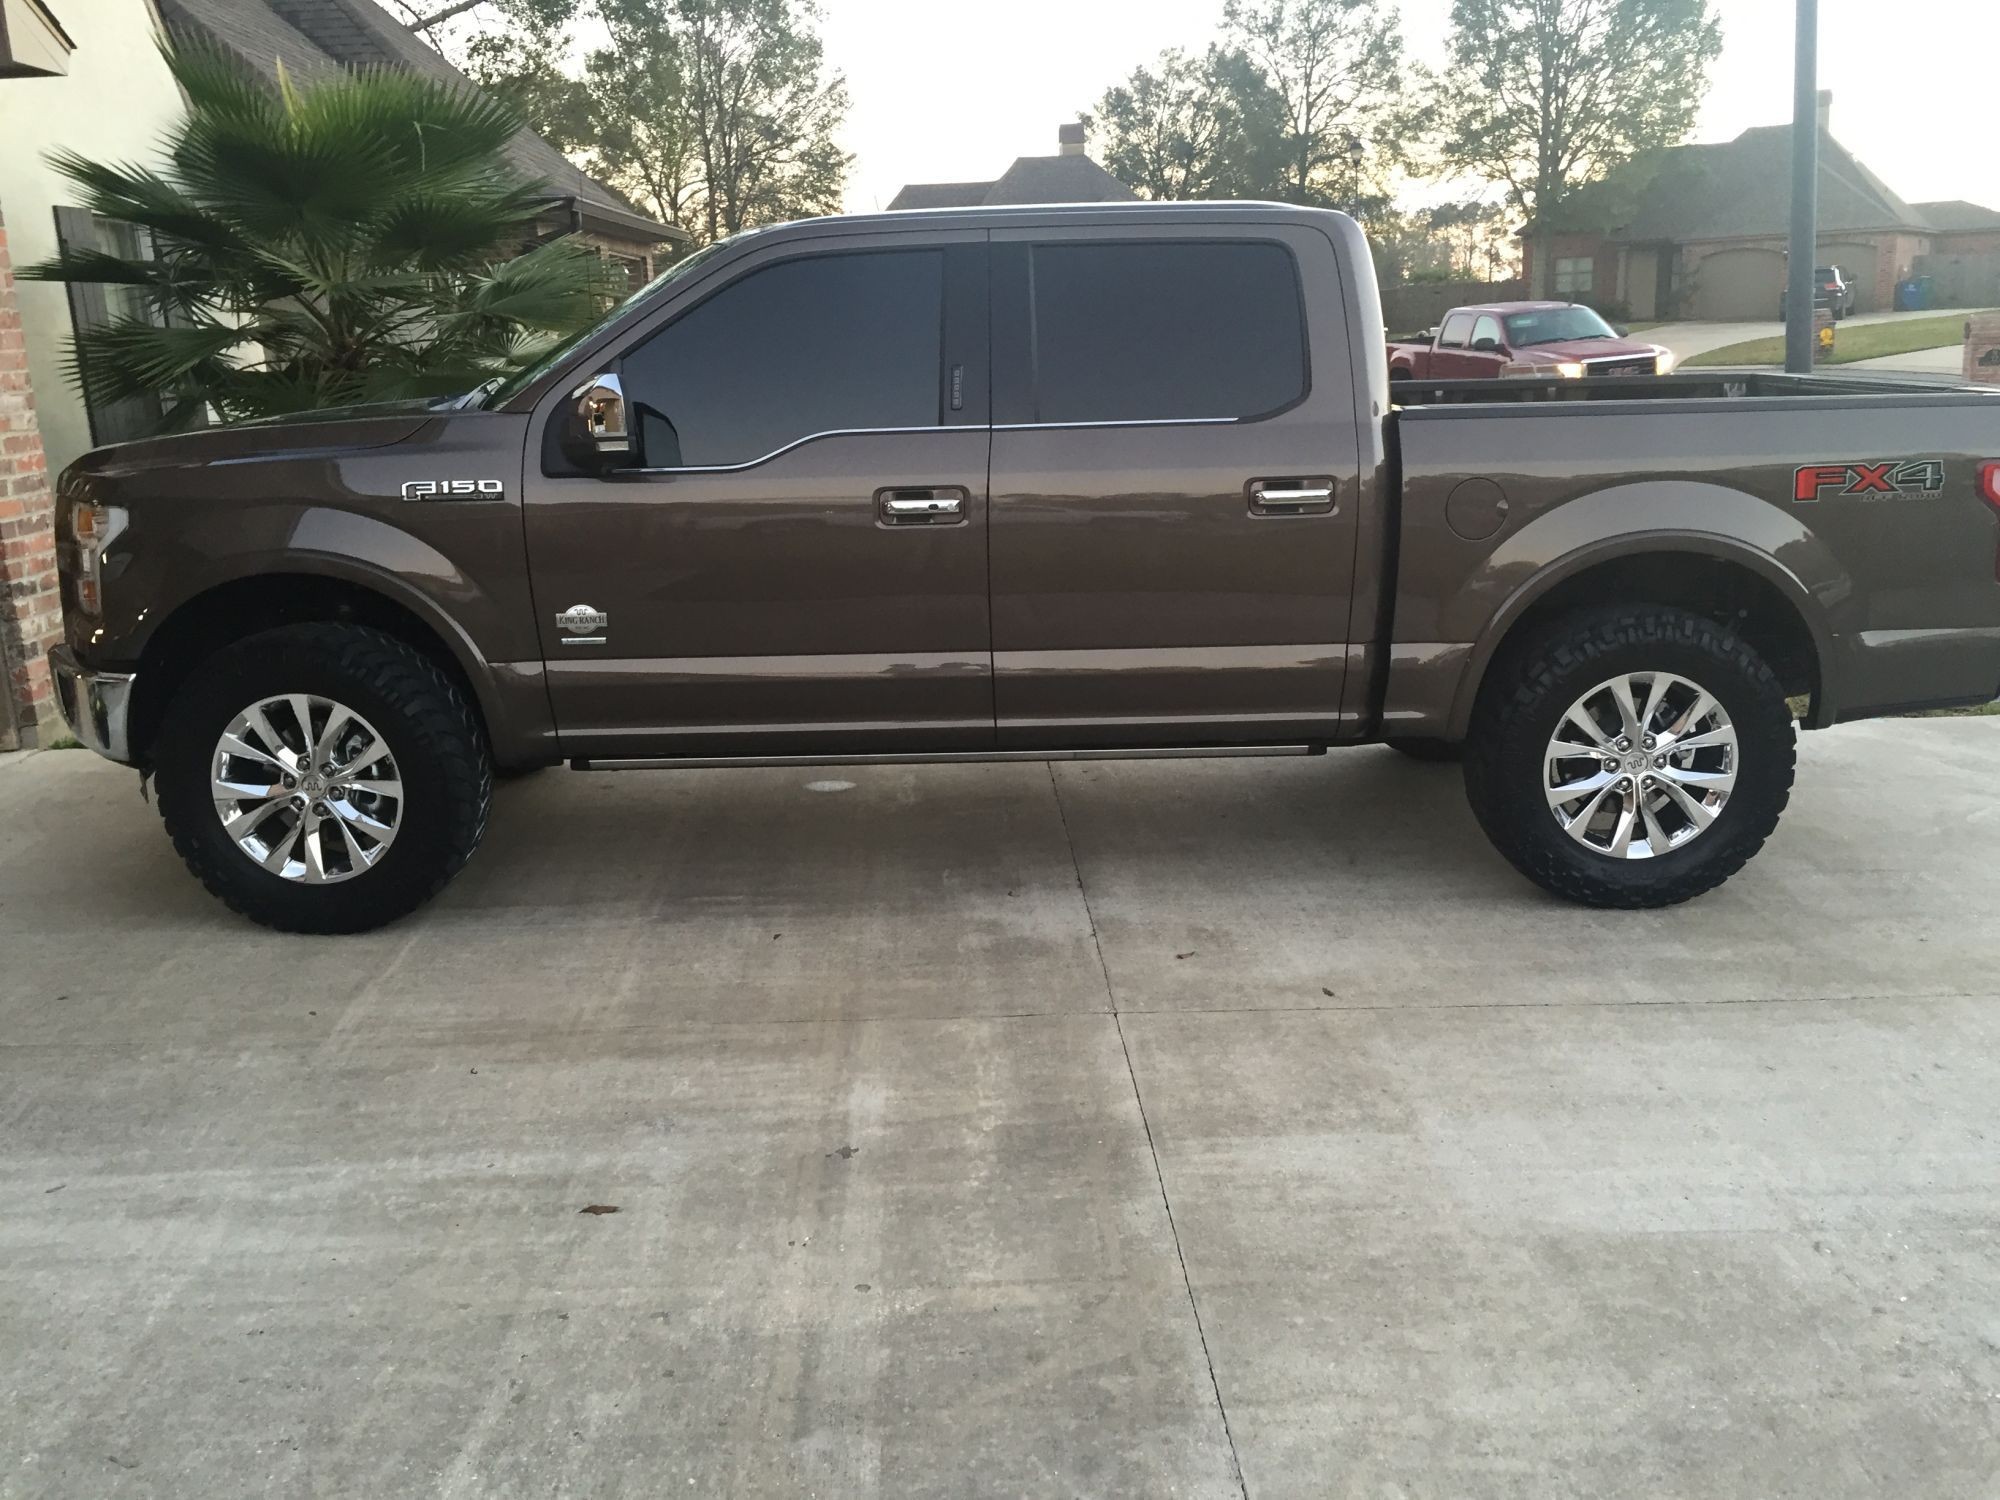 My 2 5 leveled w 35s king ranch Page 5 Ford F150 Forum munity of Ford Truck Fans